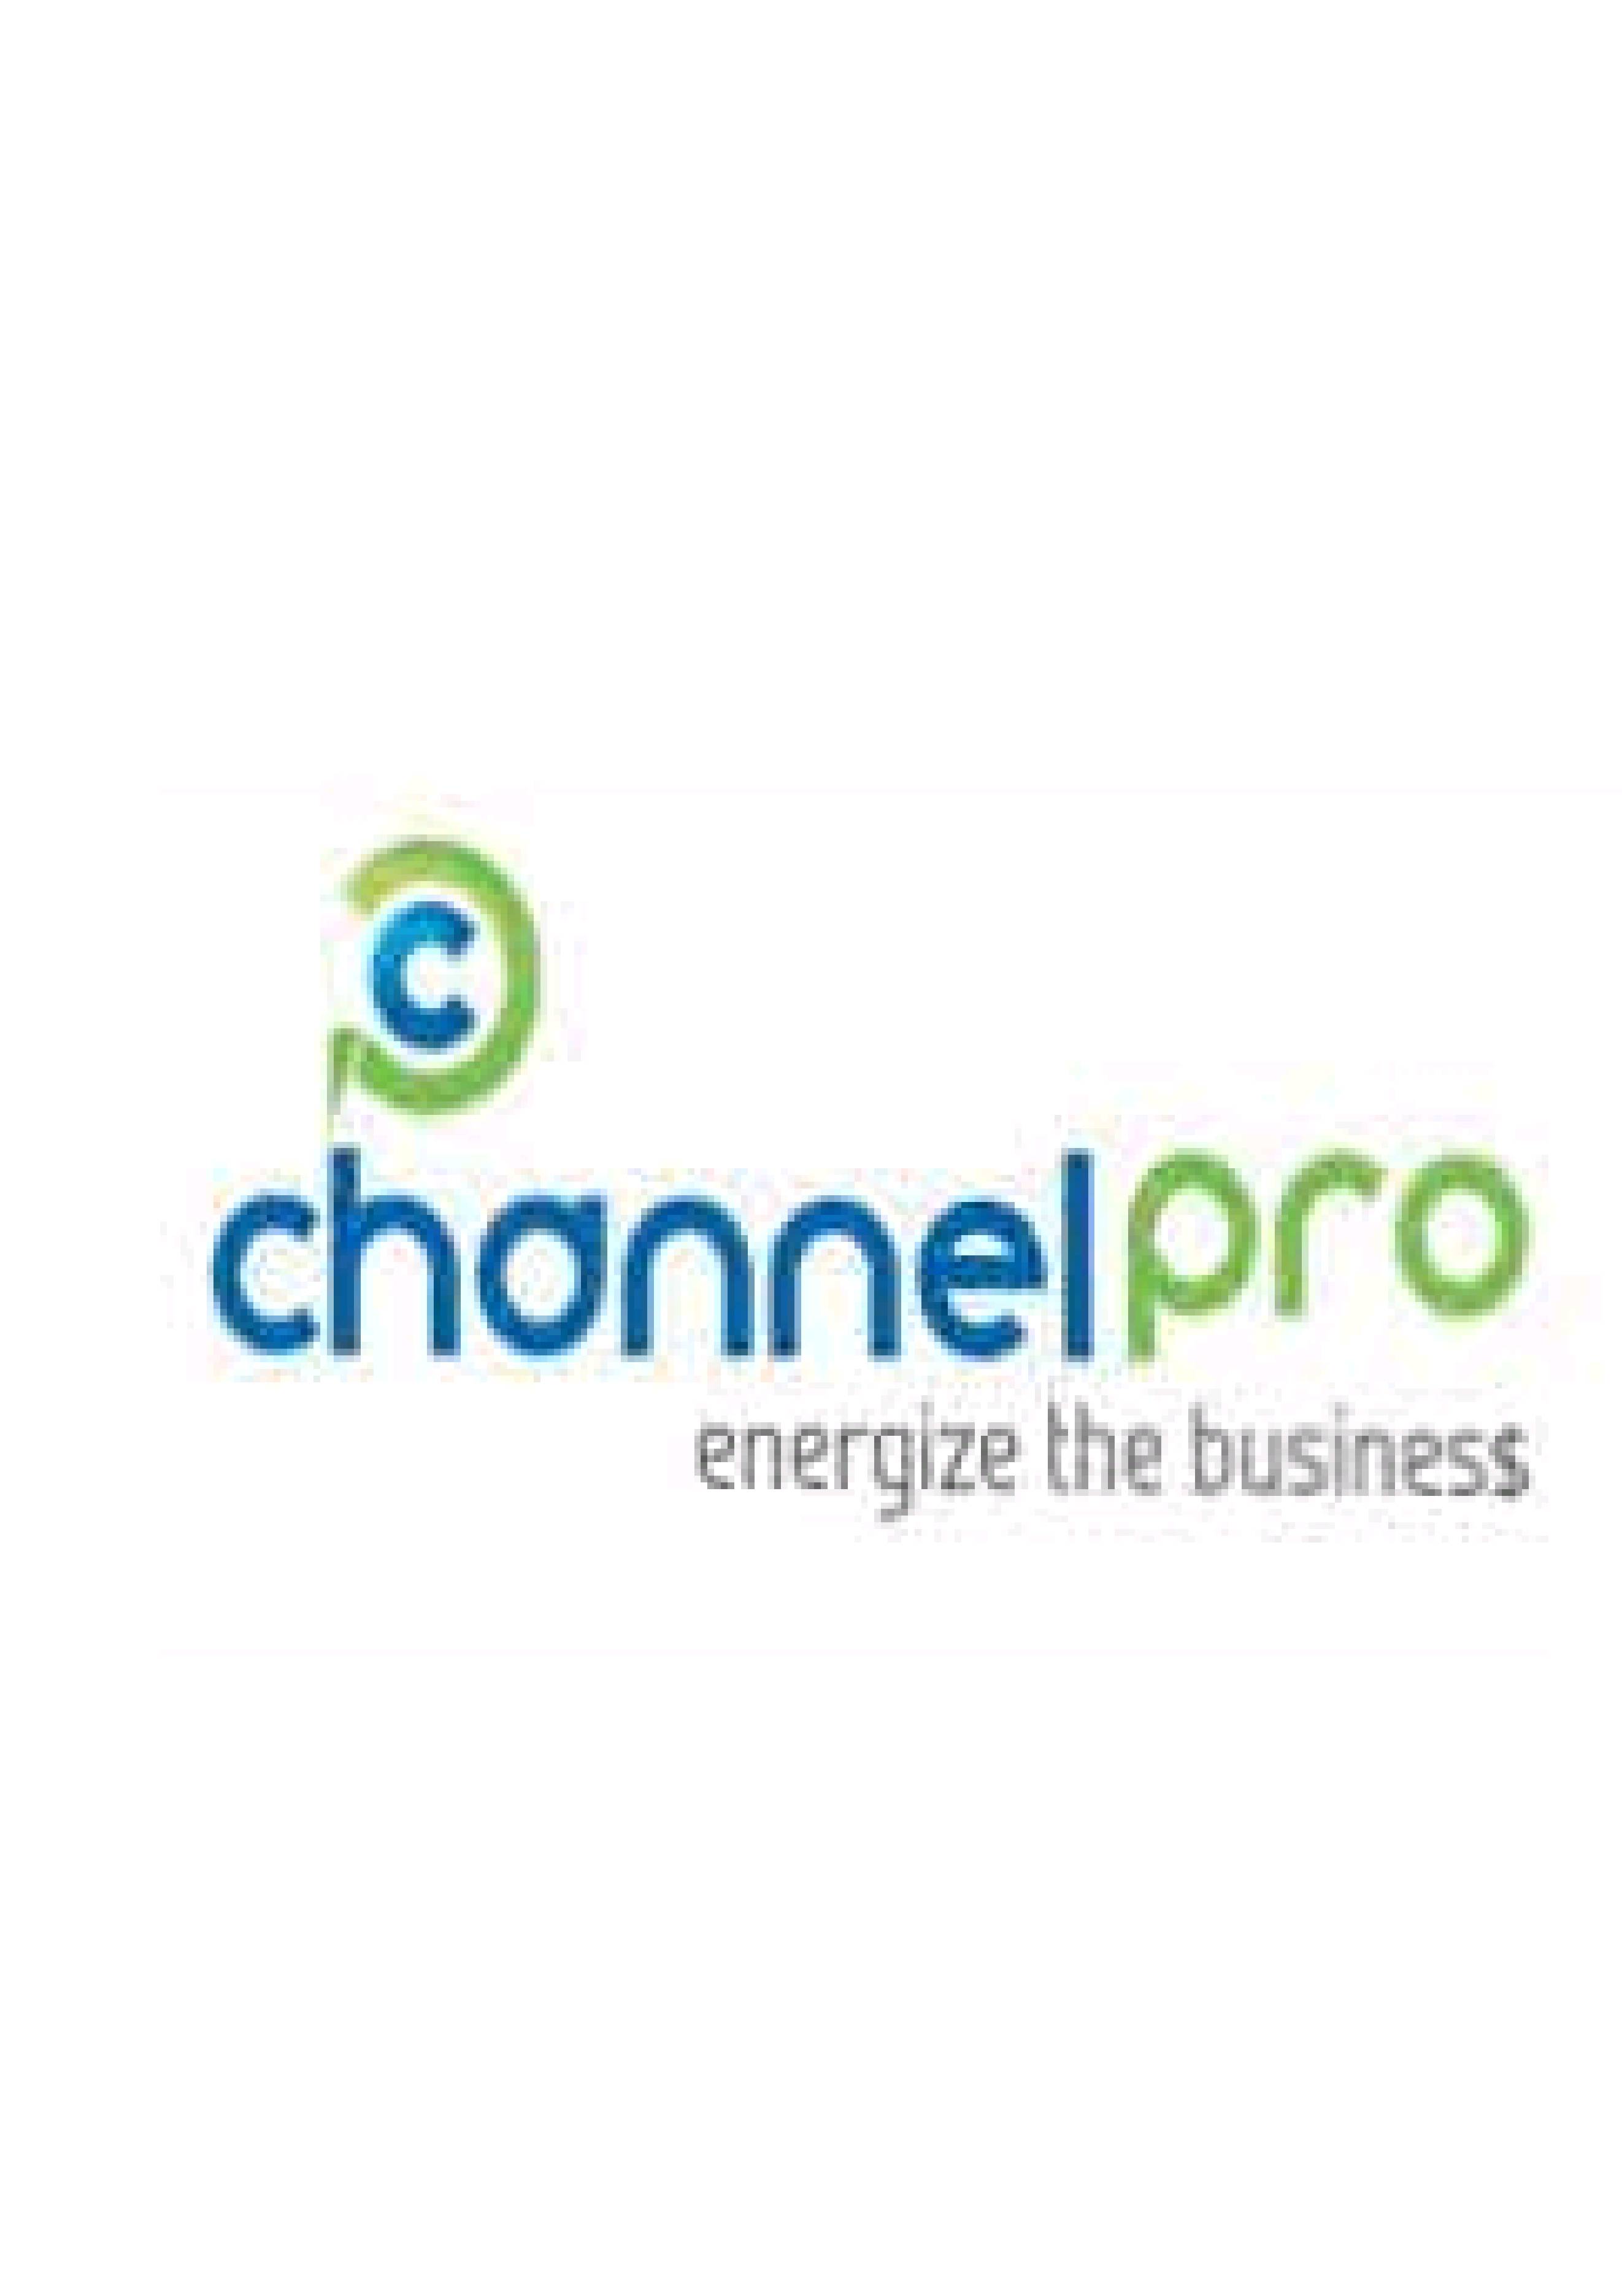 Channelpro communicationServicesAdvertising - DesignAll Indiaother